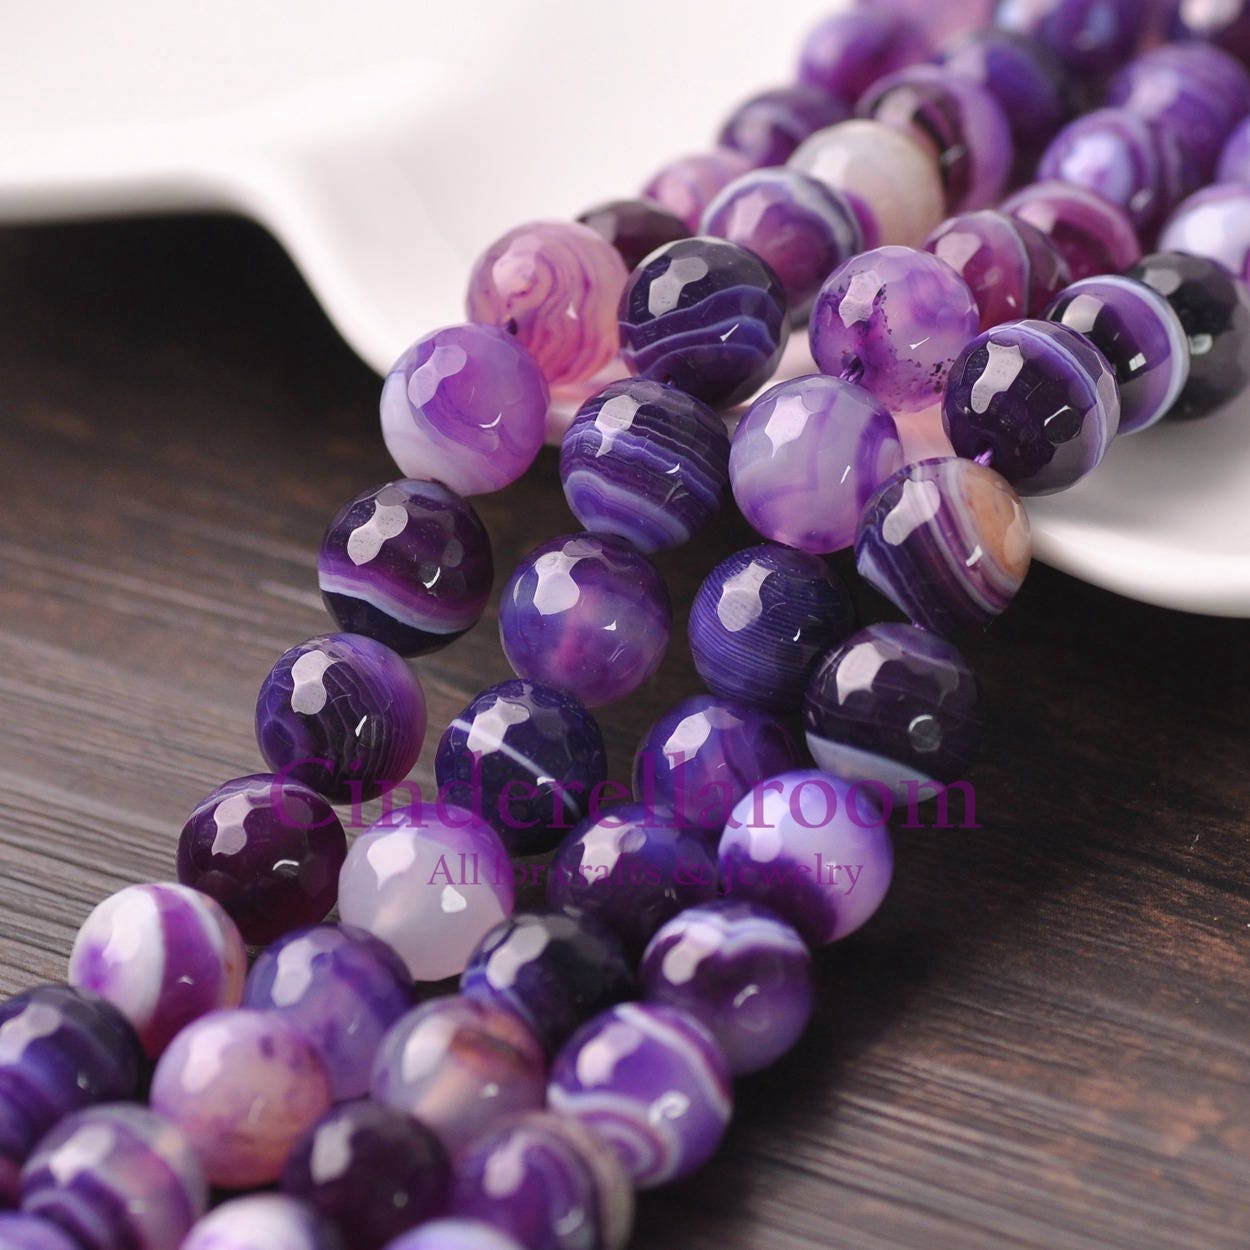 Wholesale Lot Natural Stone Gemstone Round Spacer Loose Beads 4MM 6MM 8MM 10MM 